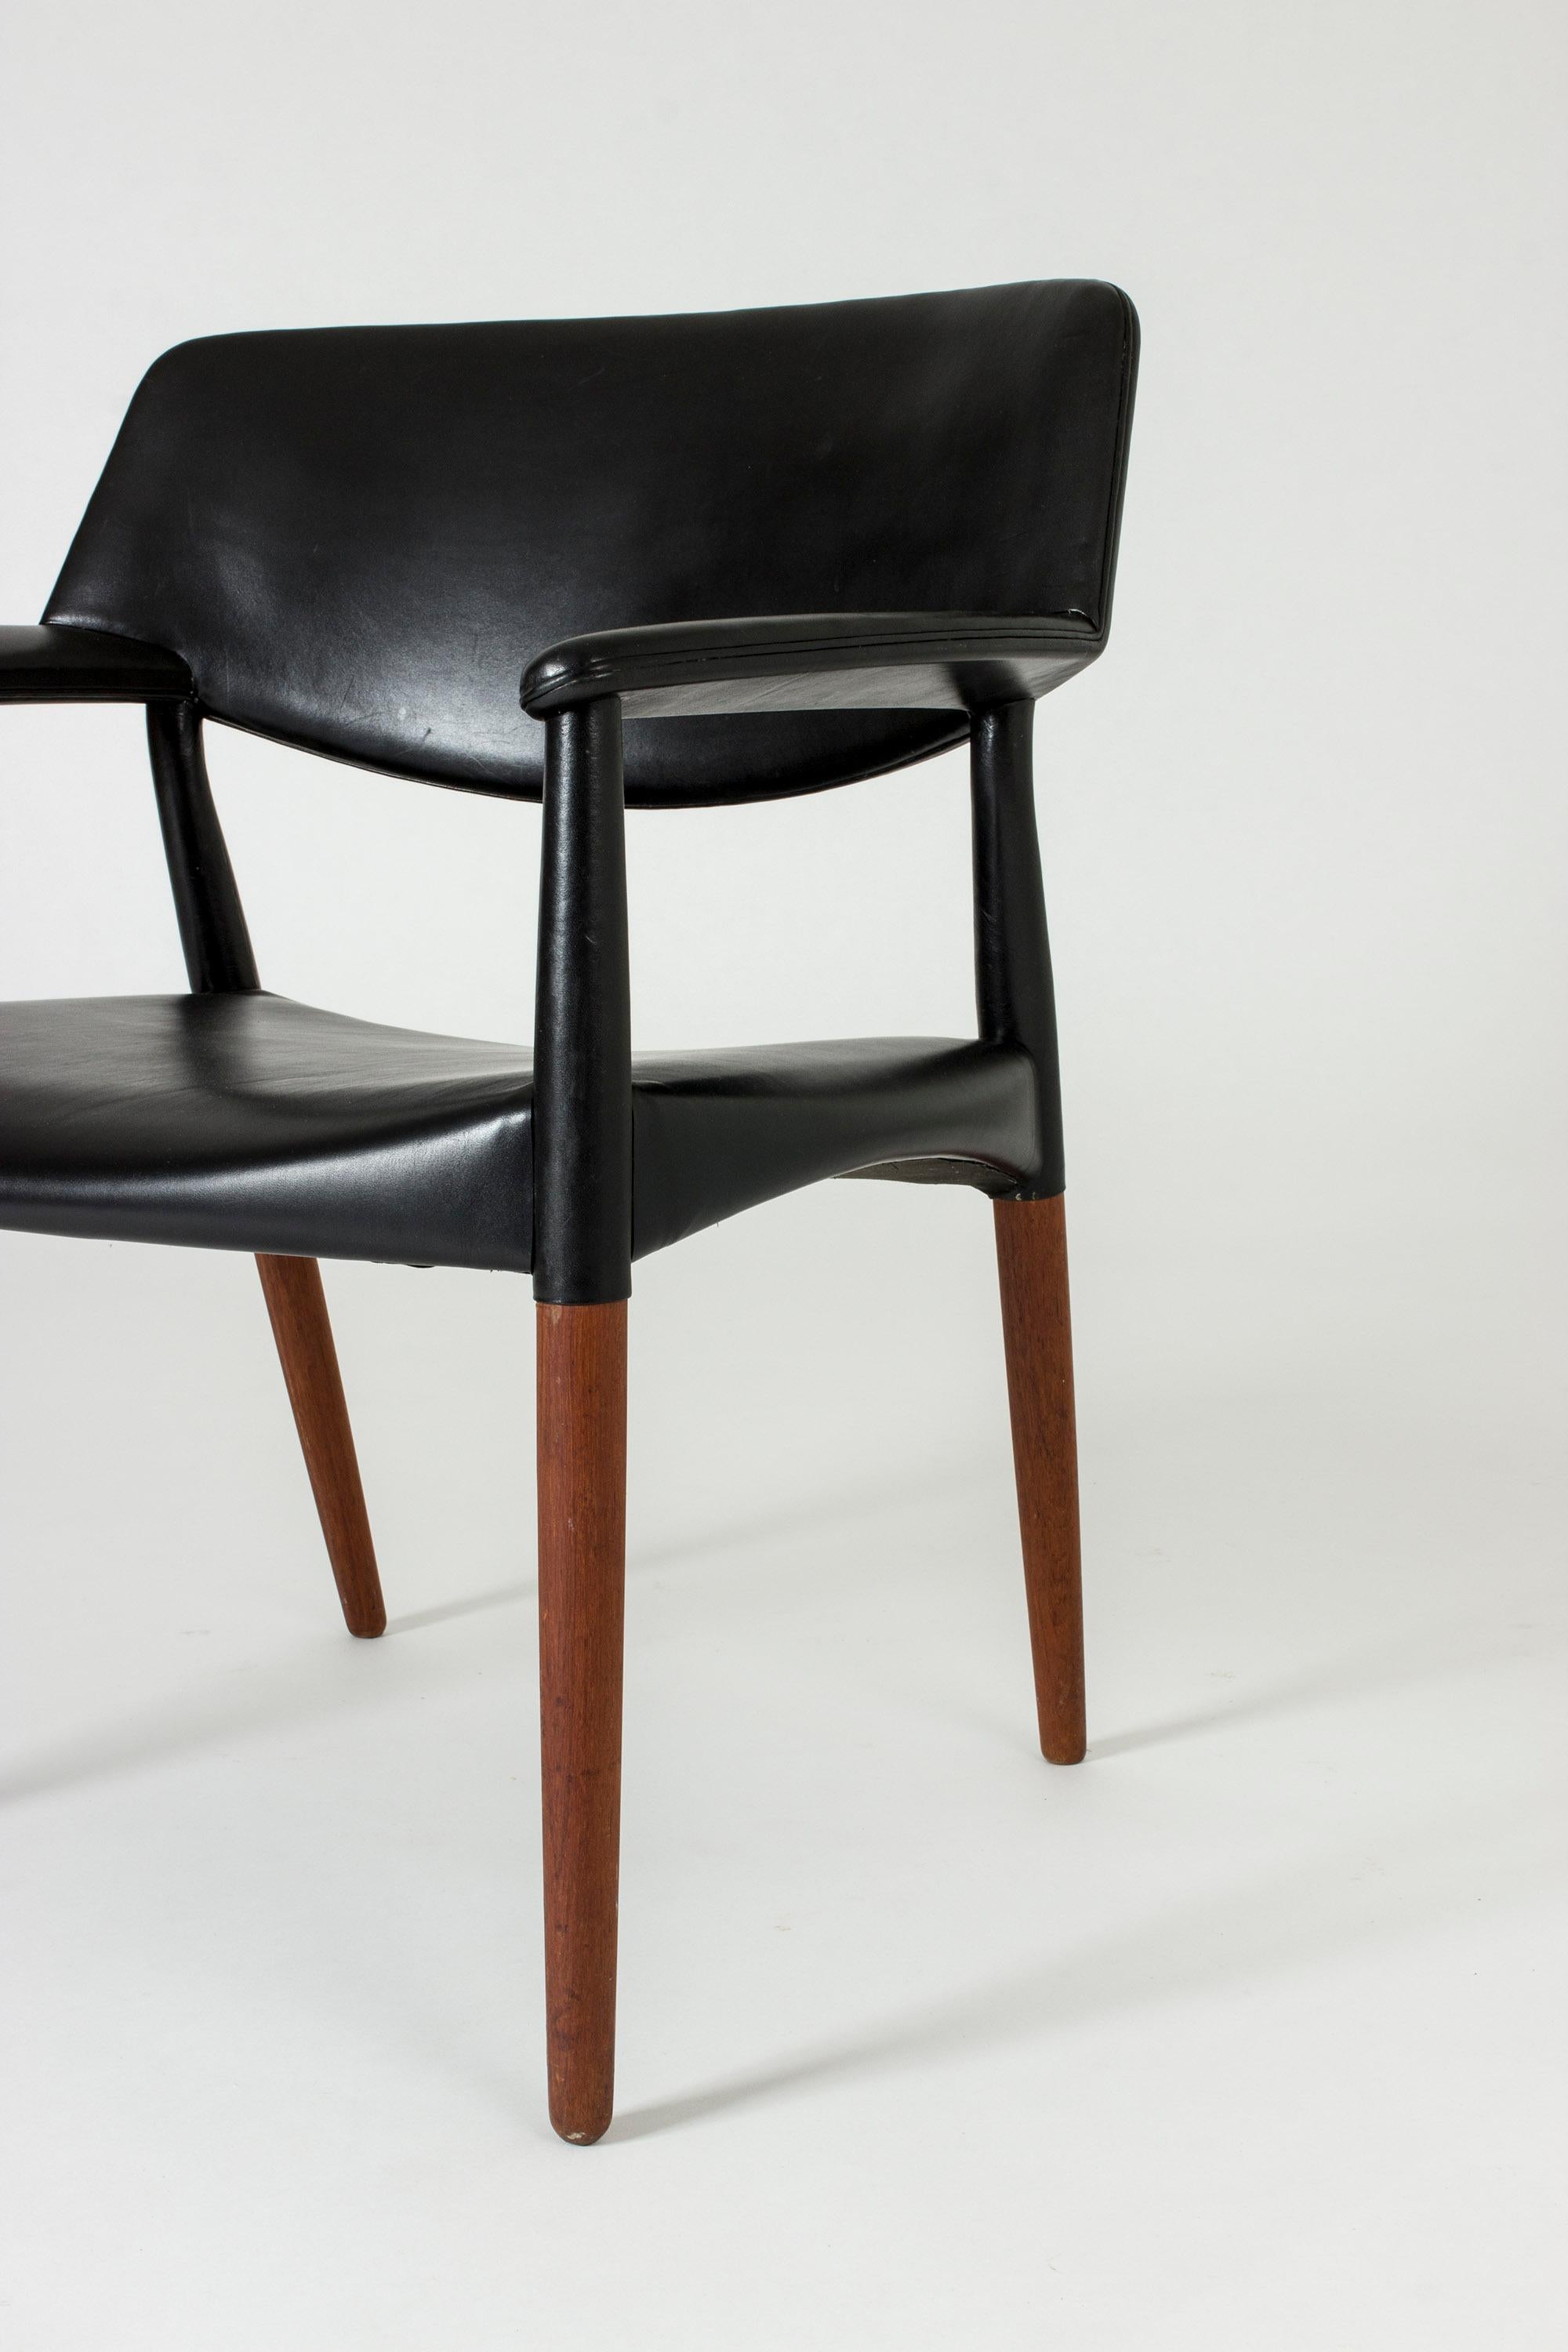 Mid-20th Century Midcentury Leather Armchair by Ejnar Larsen & Aksel Bender Madsen for Willy Beck For Sale